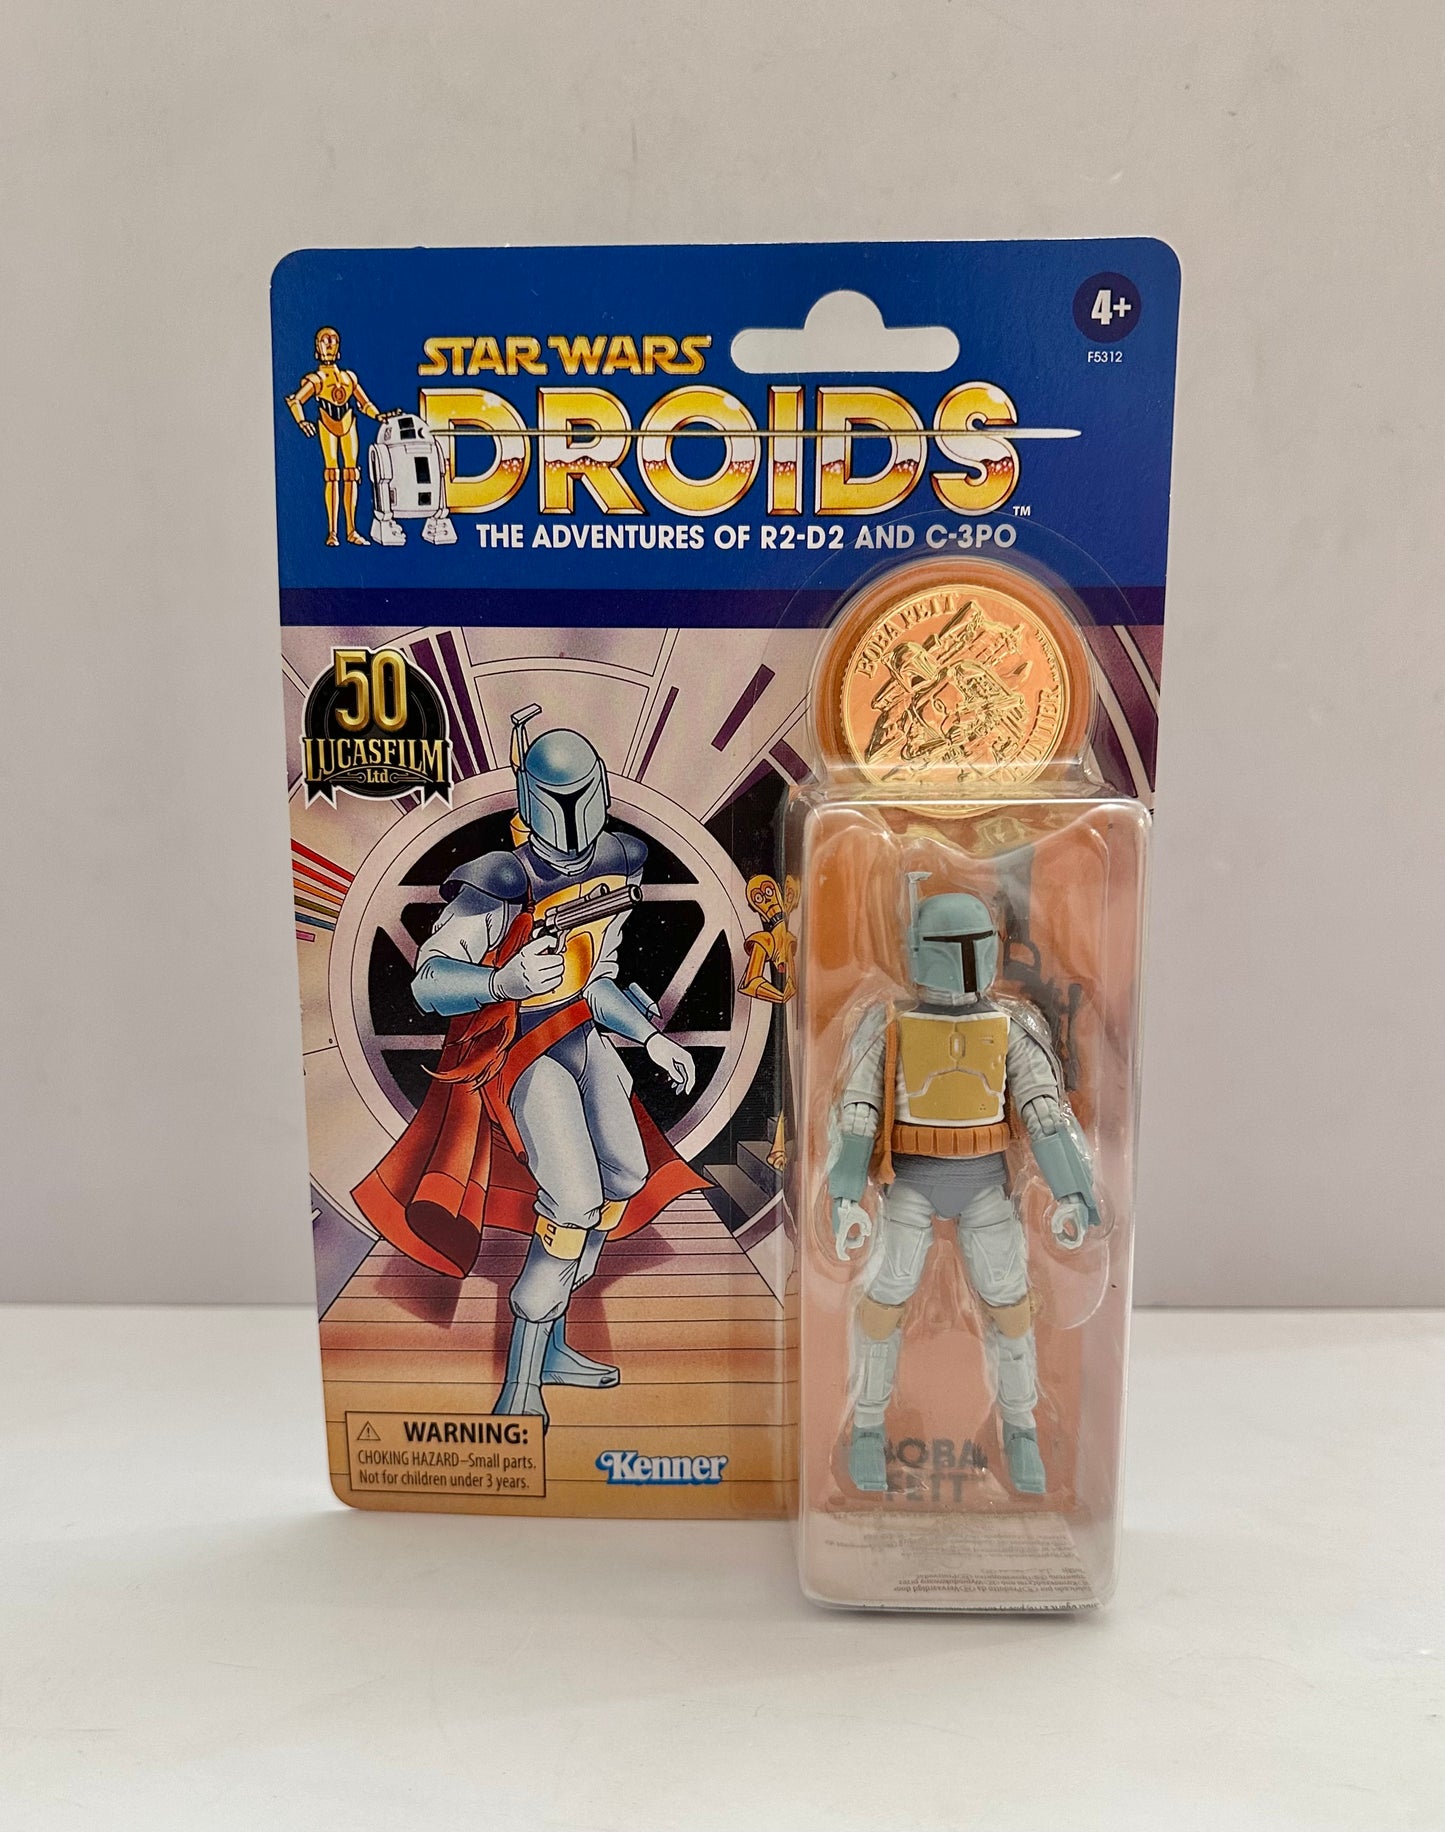 Star Wars The Vintage Collection Droids Boba Fett